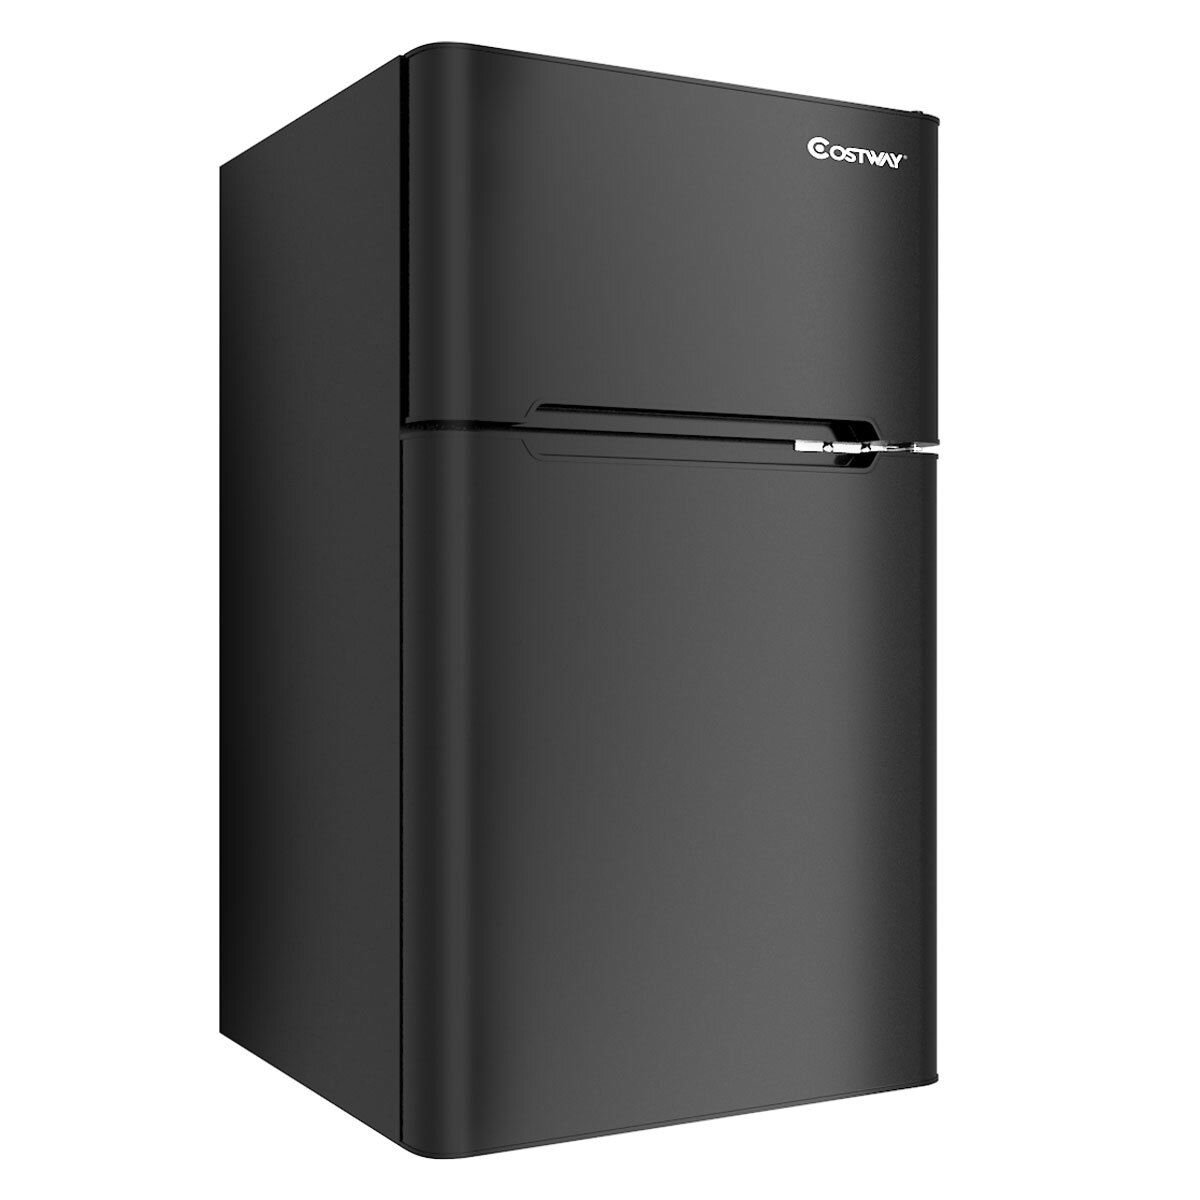 Mini Fridge with Freezer. 1.7 Cu.Ft Small Refrigerator, 6 Adjustable  Thermostat Control, One-Touch Defrost, Reversible Doors Design, Dorm/Office/Home  Refrigerator, Black 